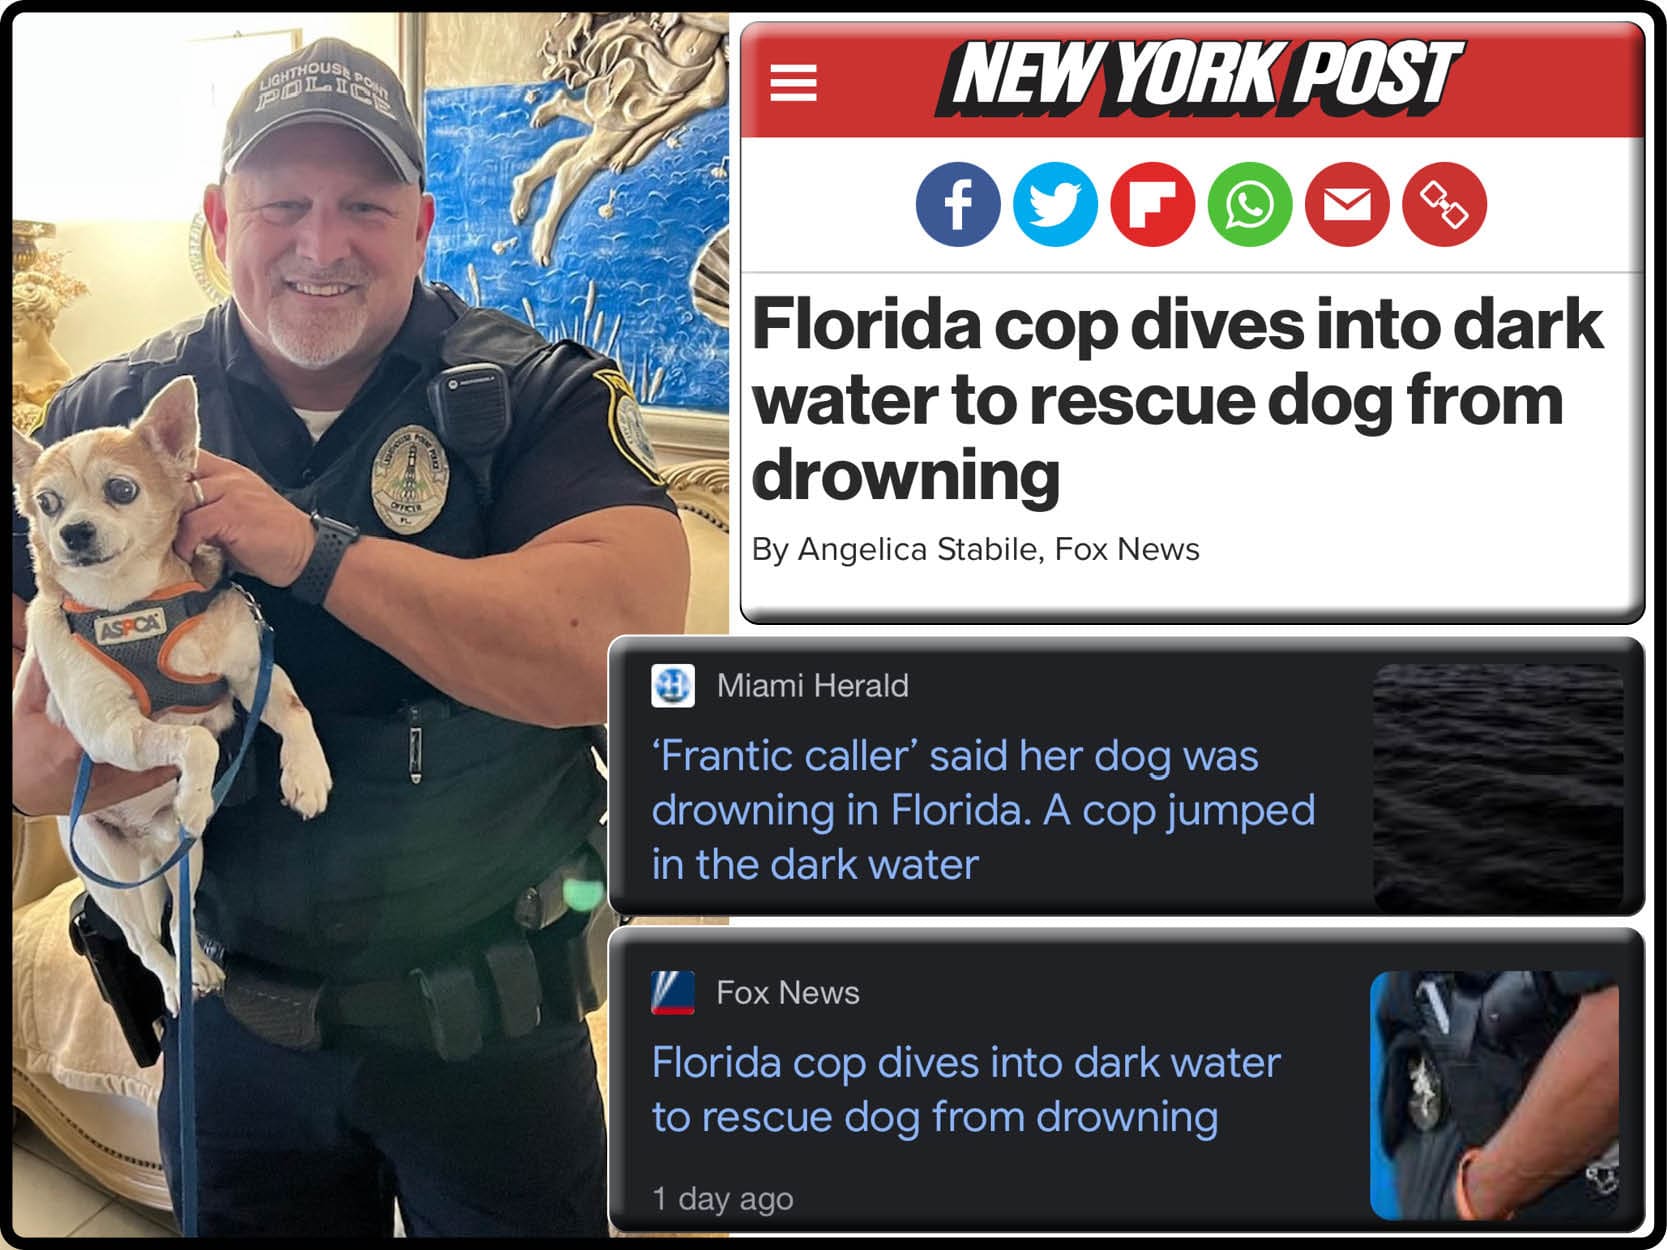 Lighthouse Point Cop Saves Dog, Garners National Attention